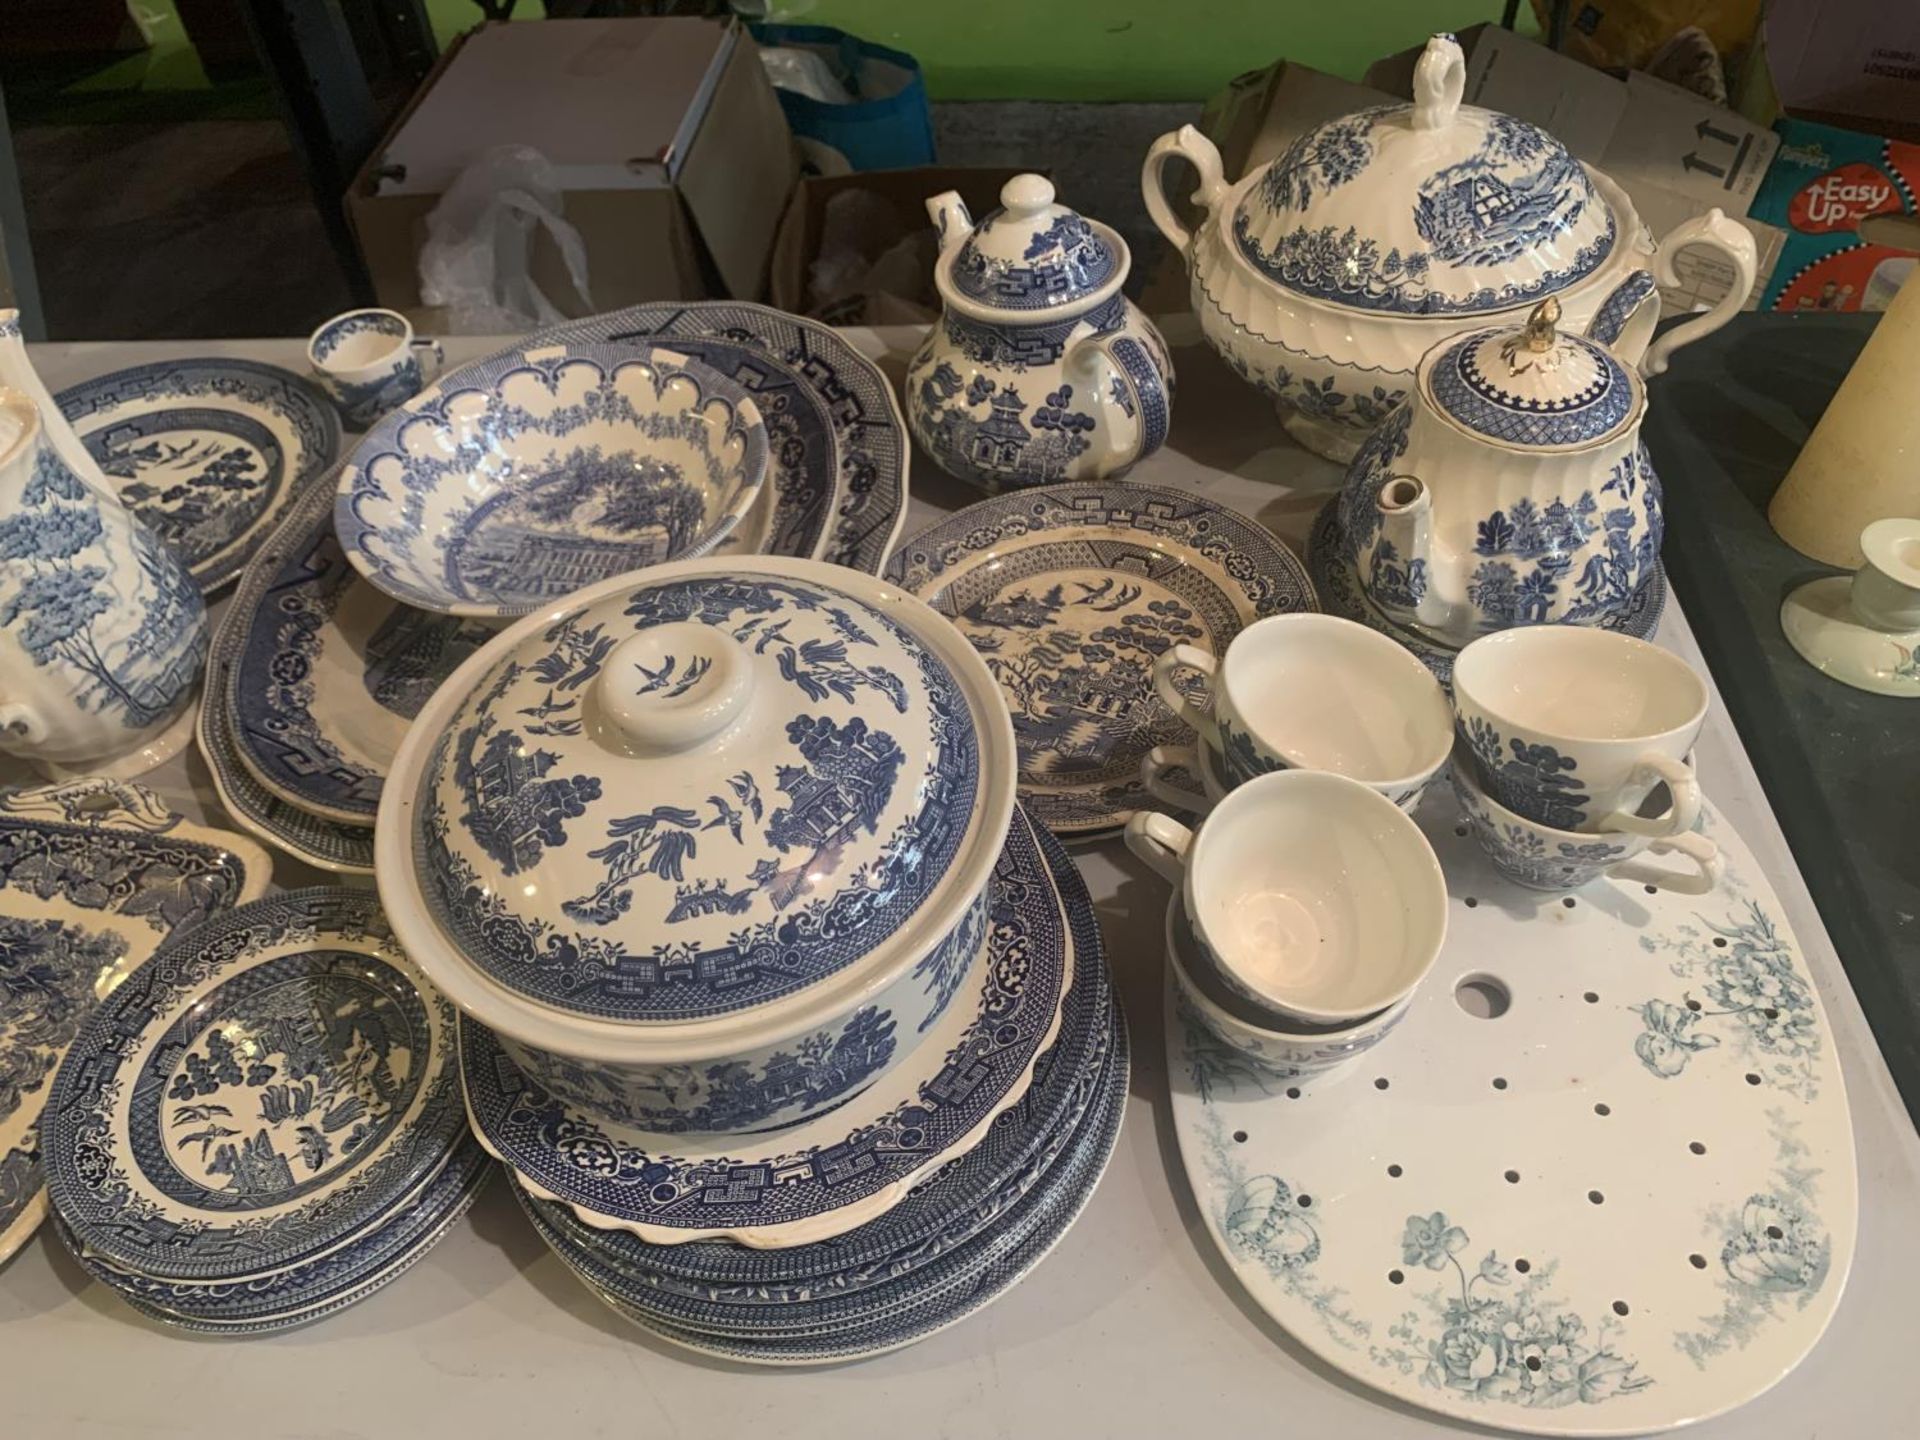 A LARGE ASSORTMENT OF BLUE AND WHITE DECORATIVE CERAMICS TO INCLUDE TEAPOTS, PLATES AND PLACE MATS - Image 3 of 4